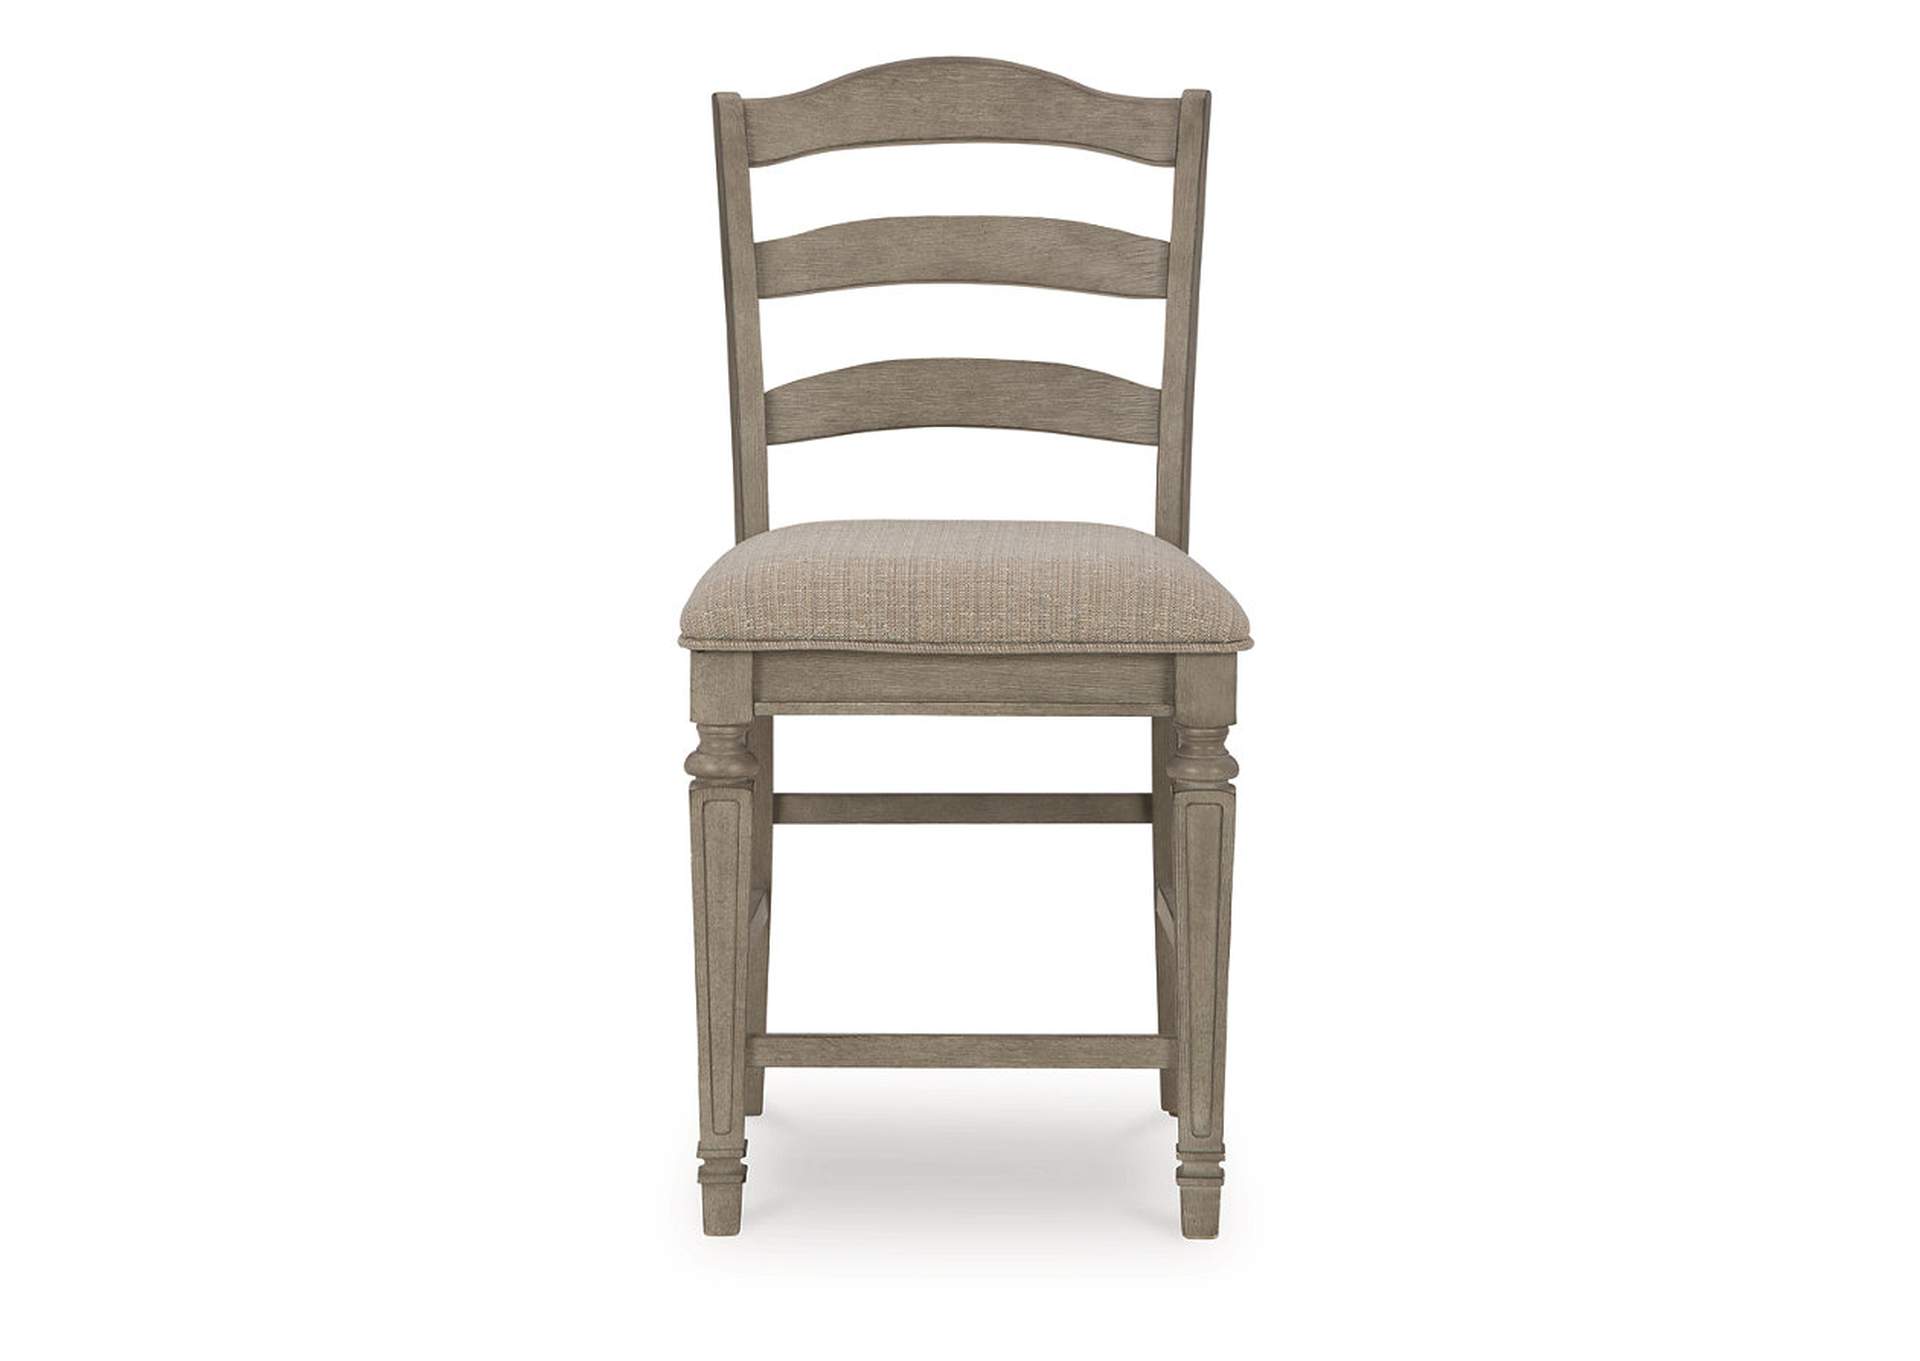 Lodenbay Counter Height Barstool,Signature Design By Ashley